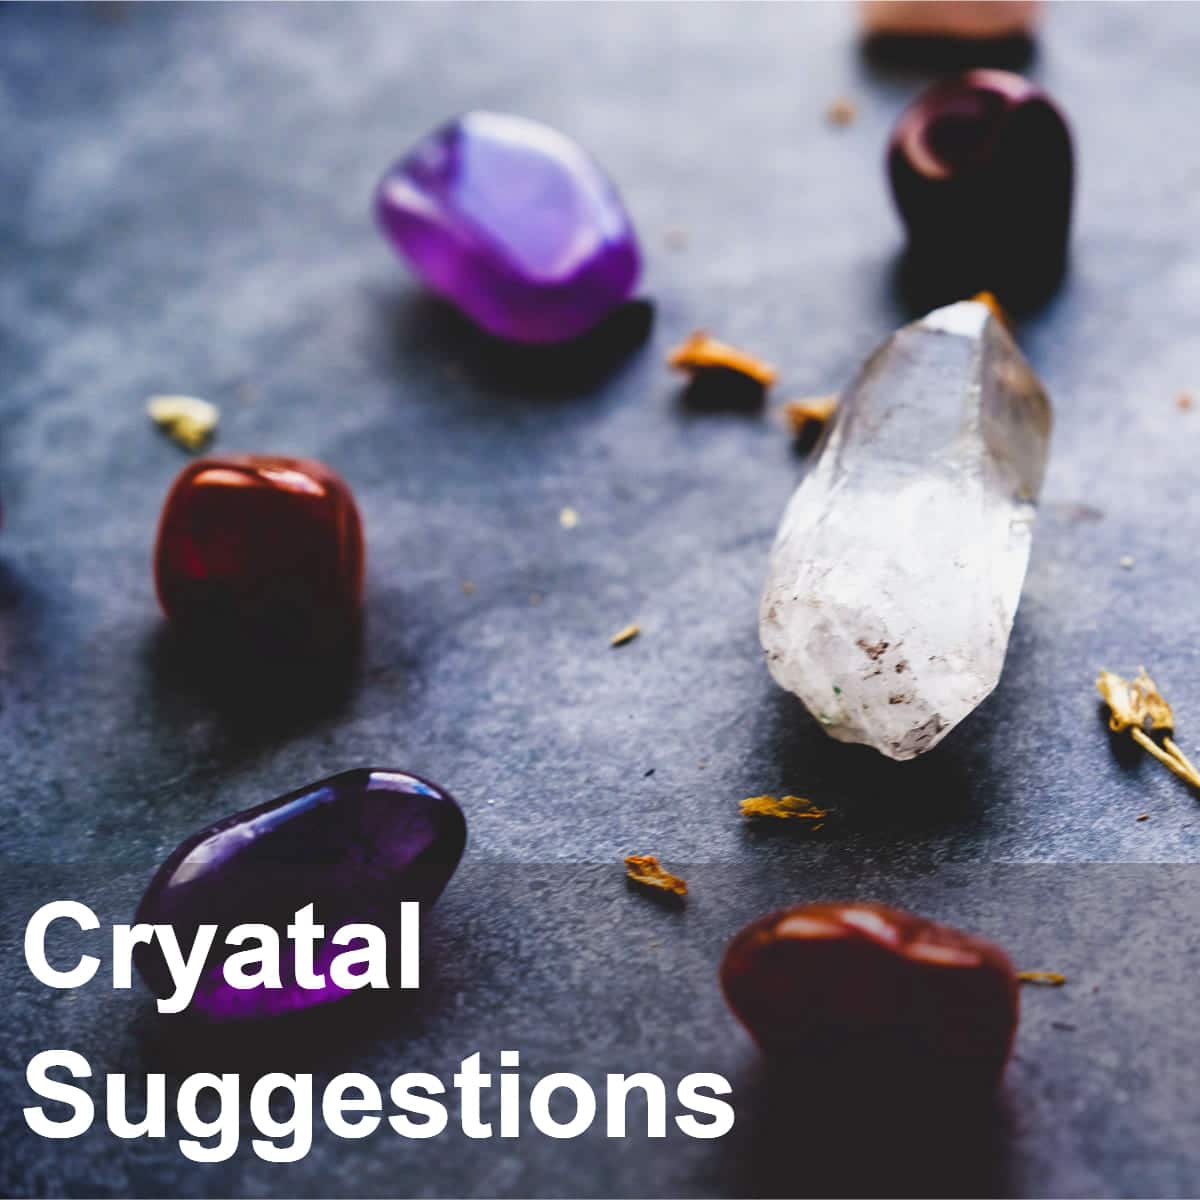 Crystal suggestions